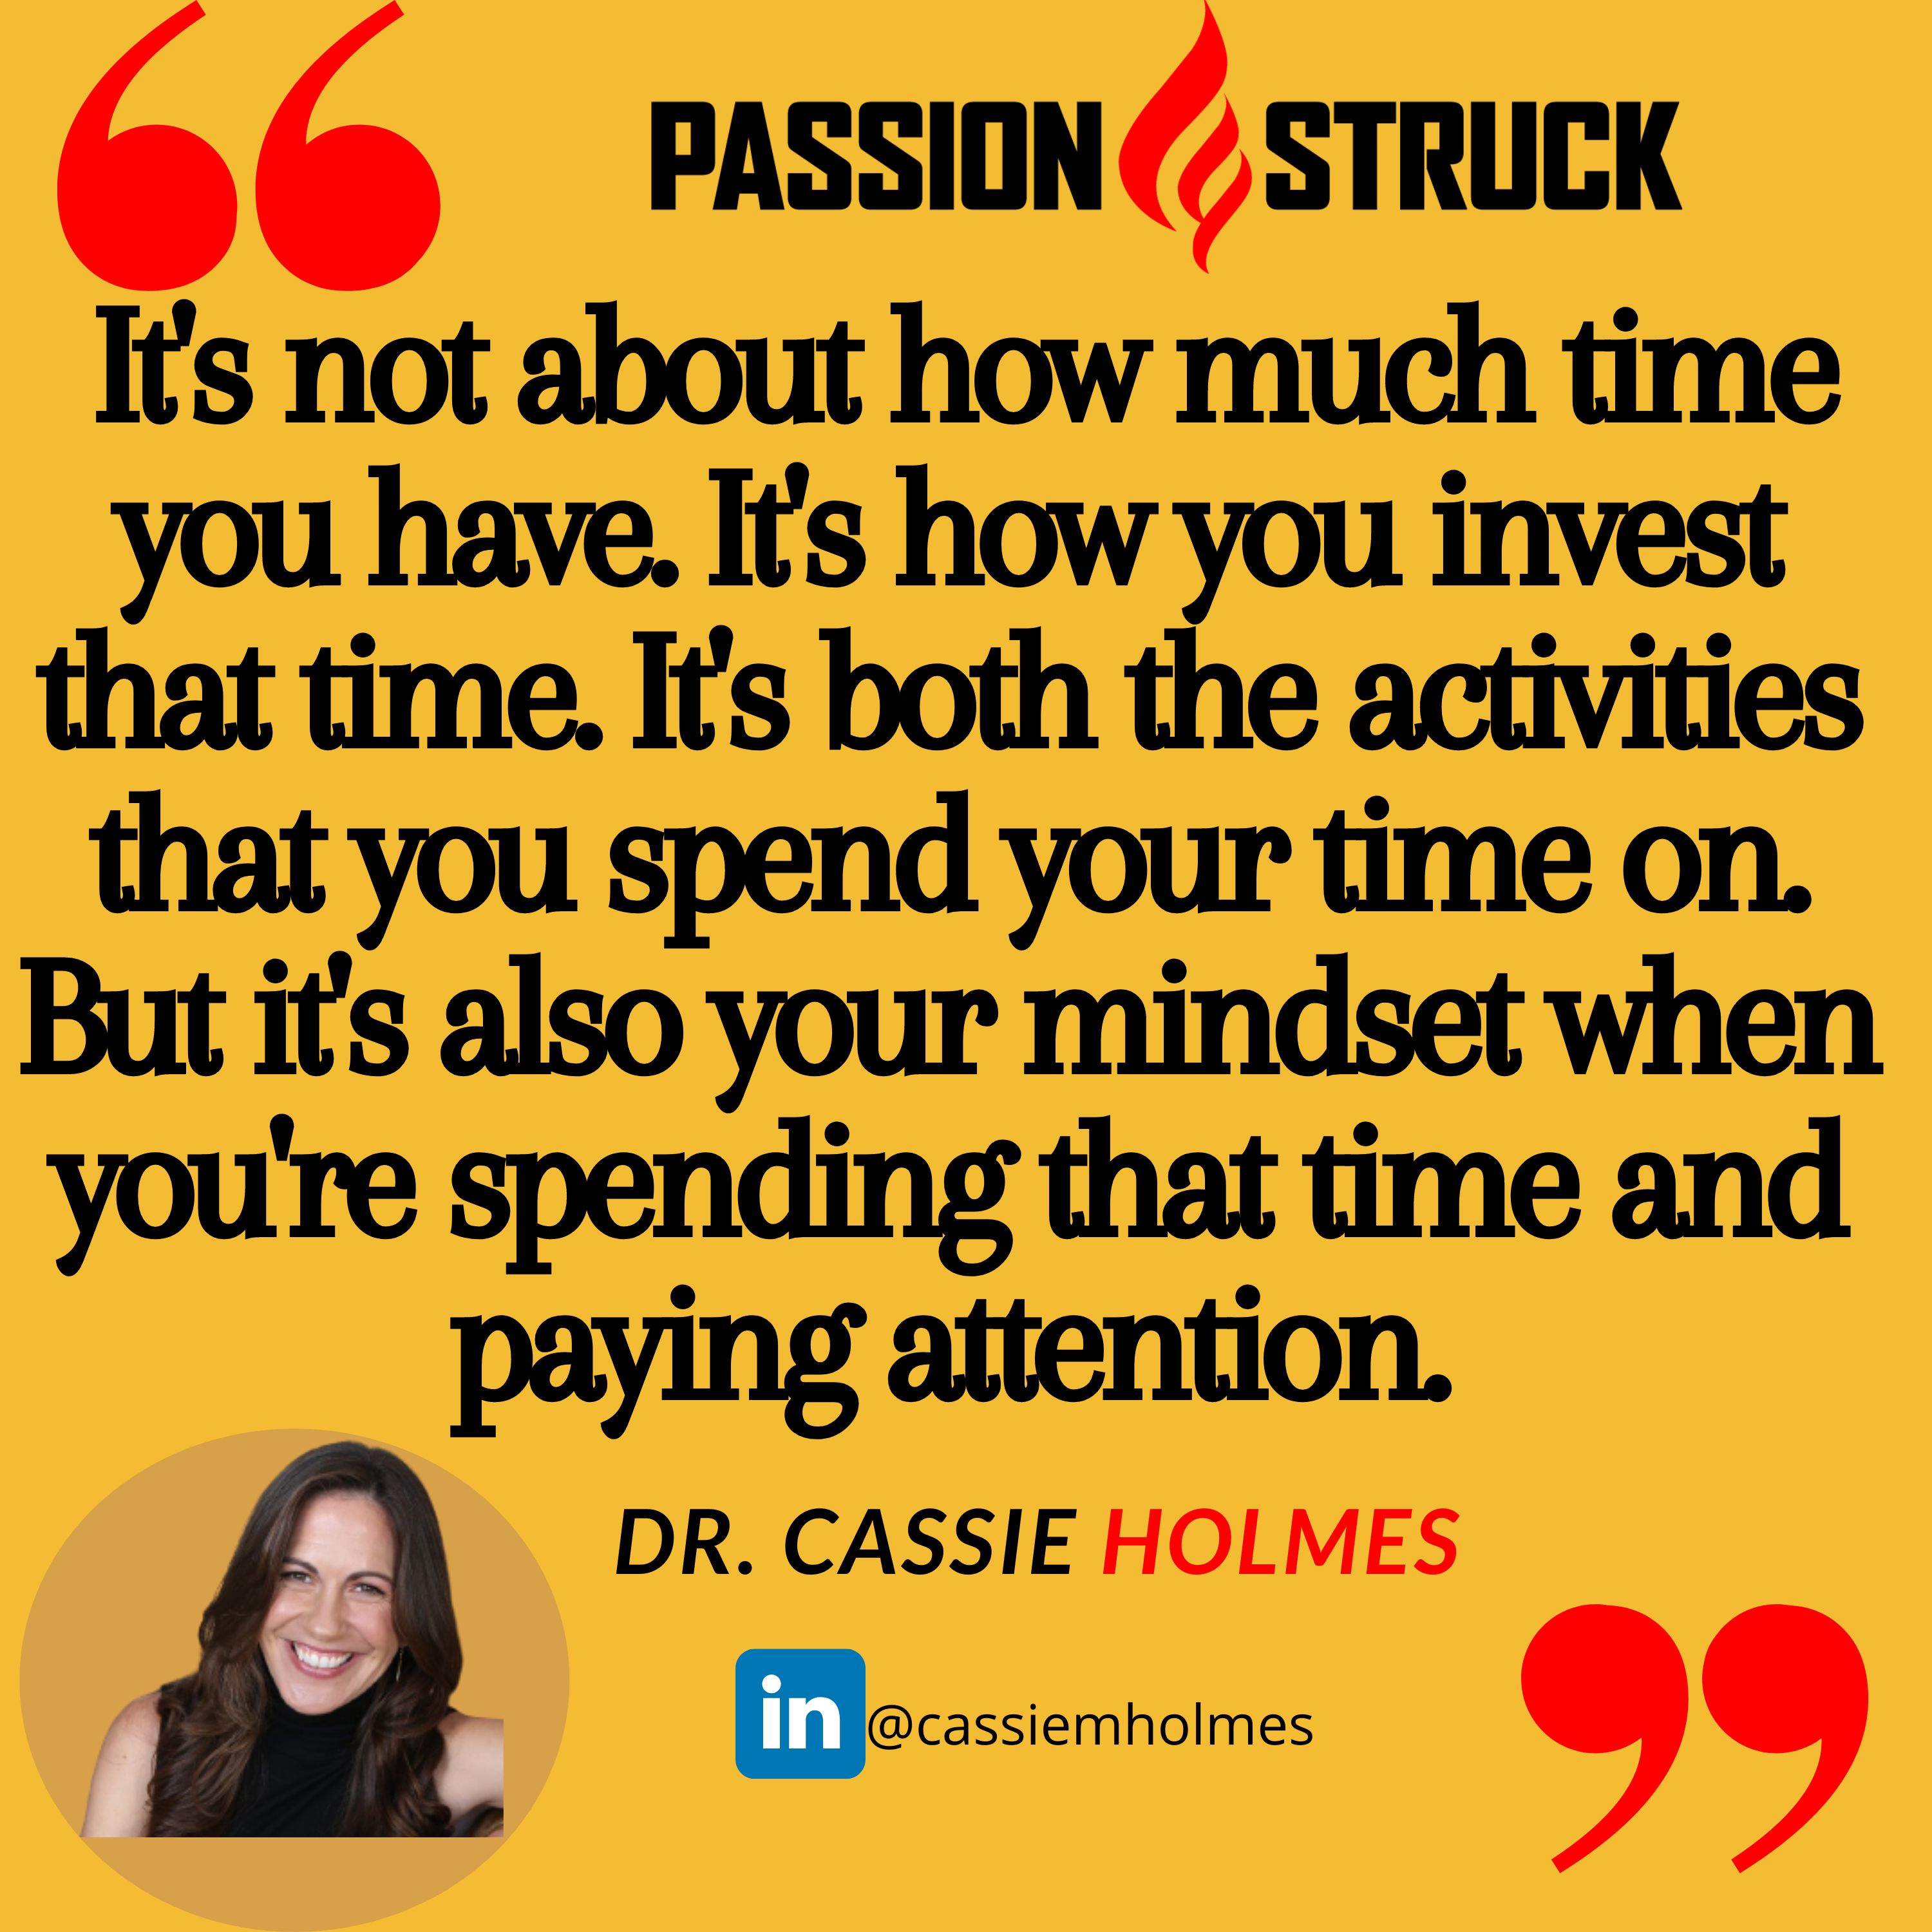 Quote by Cassie Holmes from the Passion Struck podcast: It's not about how much time you have. It's how you invest that time. It's both the activities that you spend your time on. But it's also your mindset when you're spending that time and paying attention.